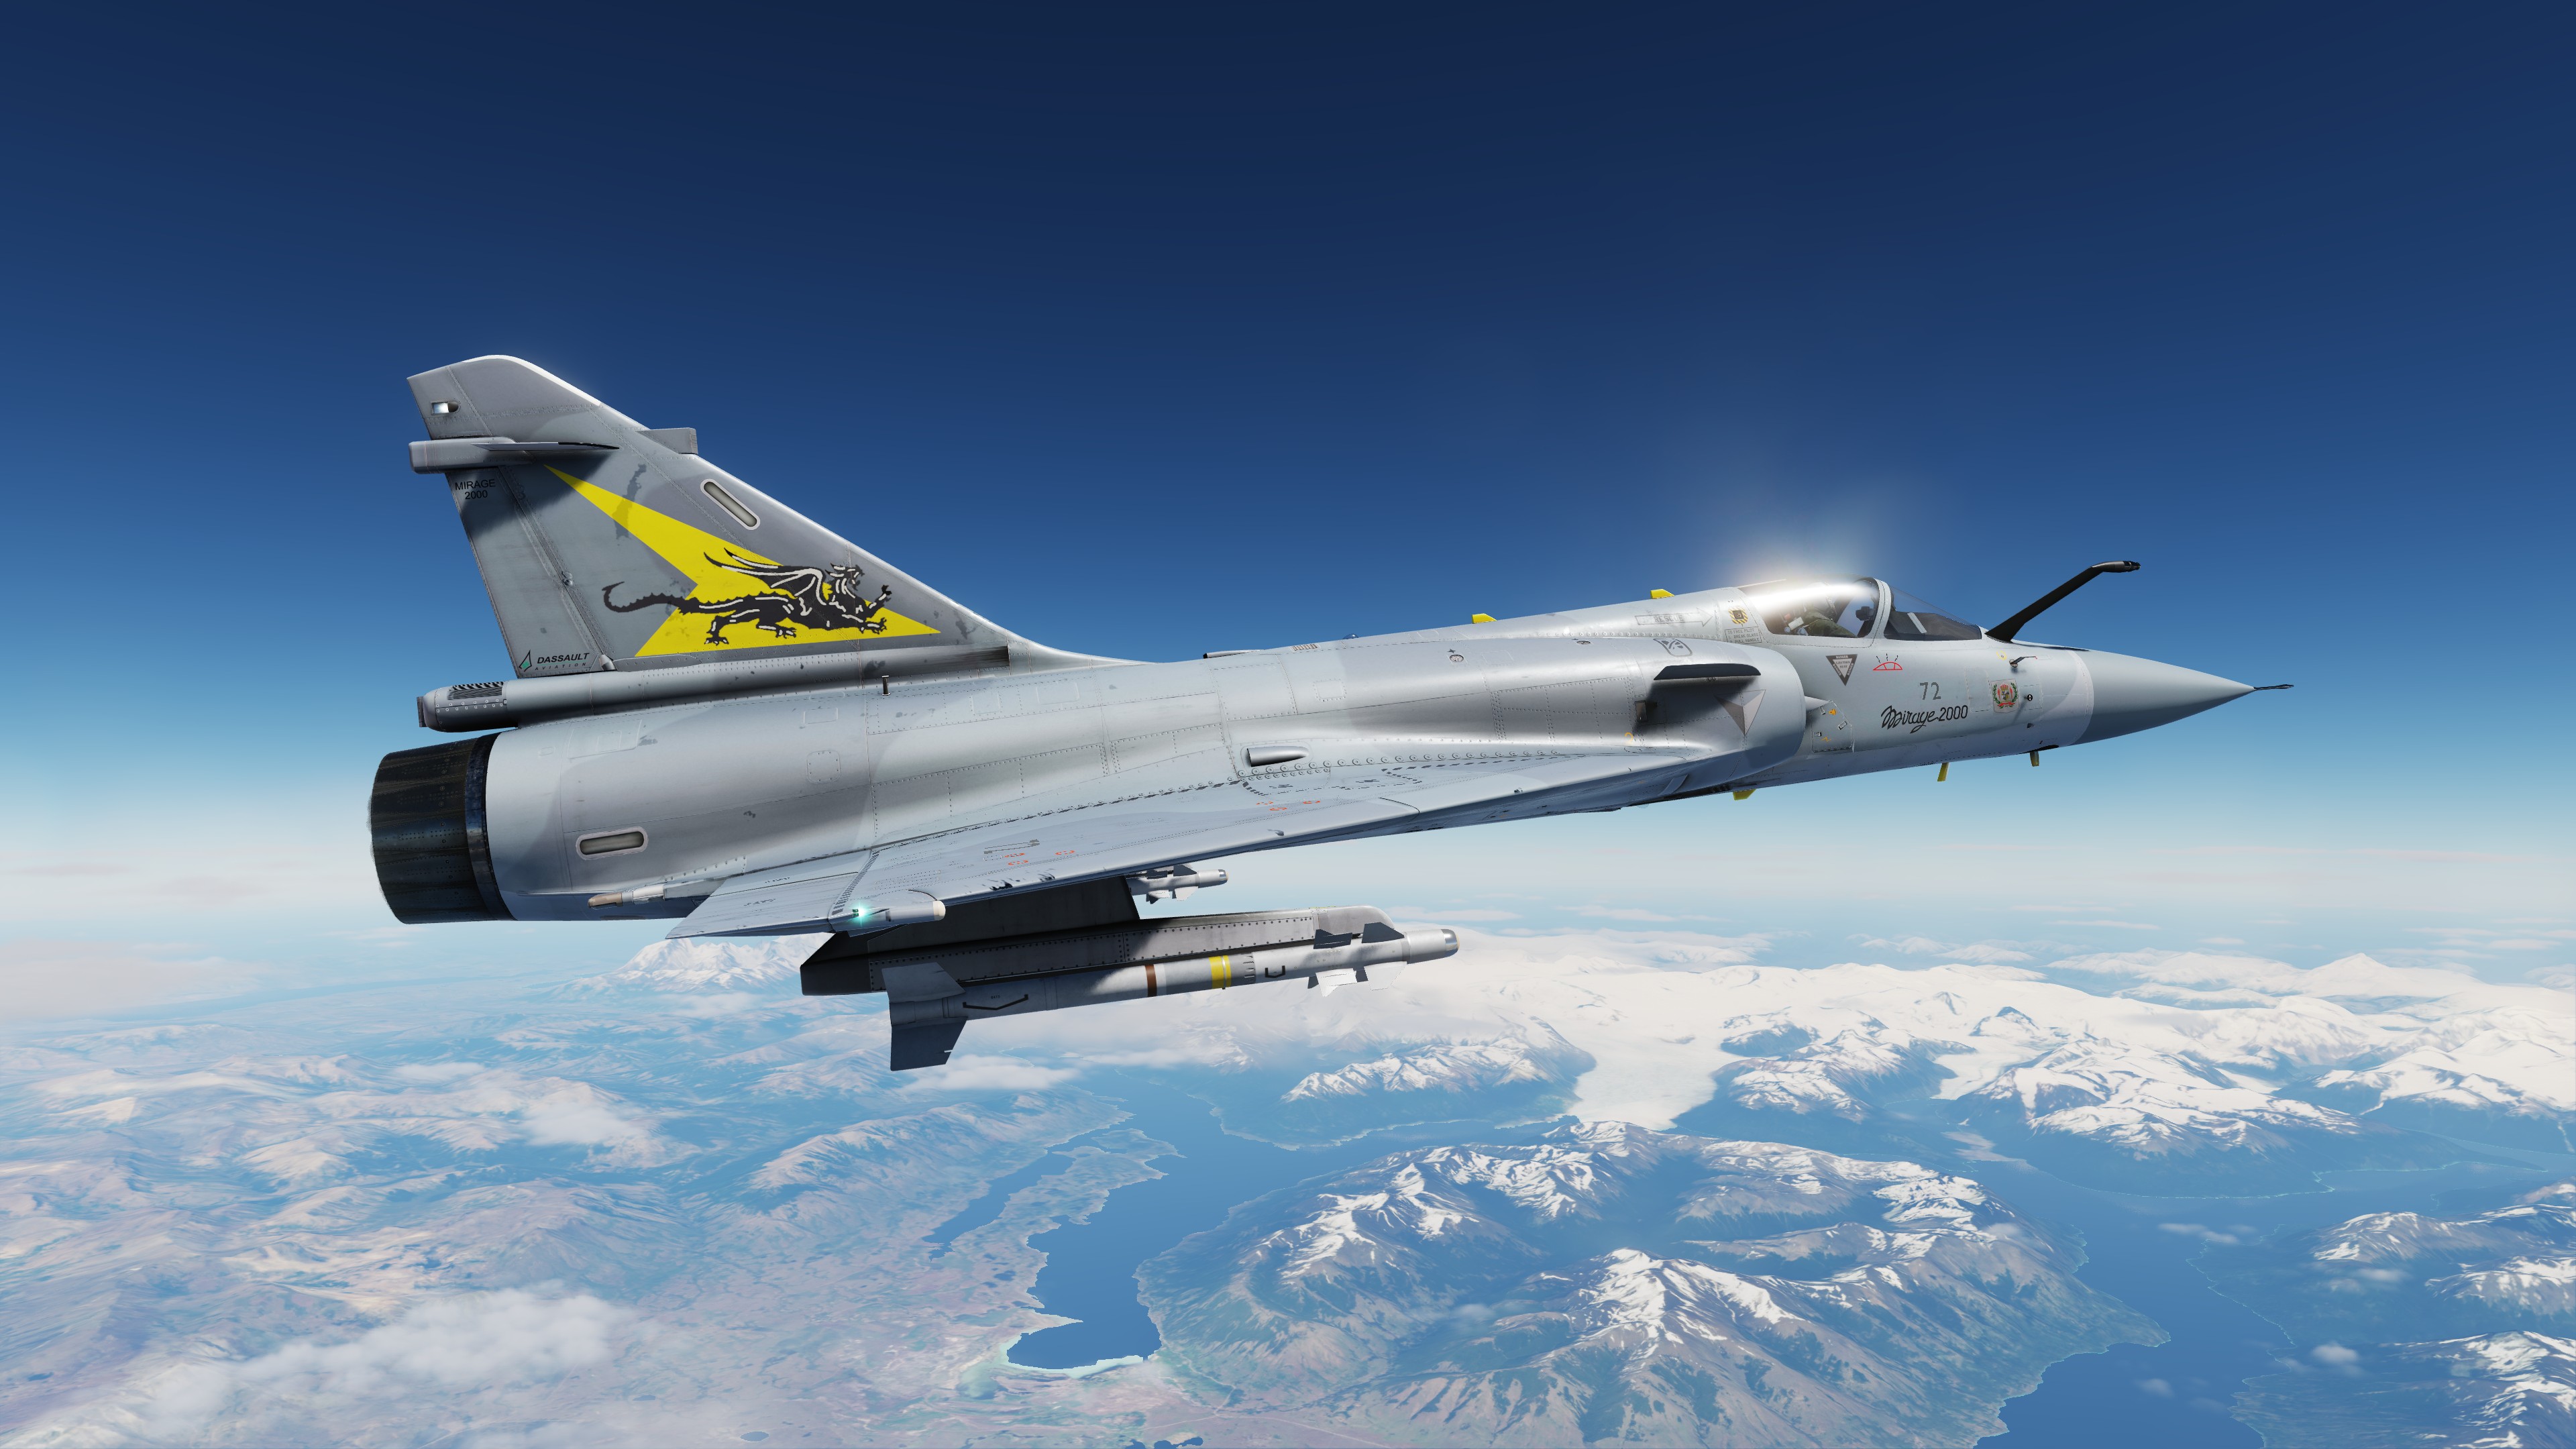 ACE COMBAT - M2000C - Nordennavic Royal Air Force - Sqn "Cote d'Or" V1.2